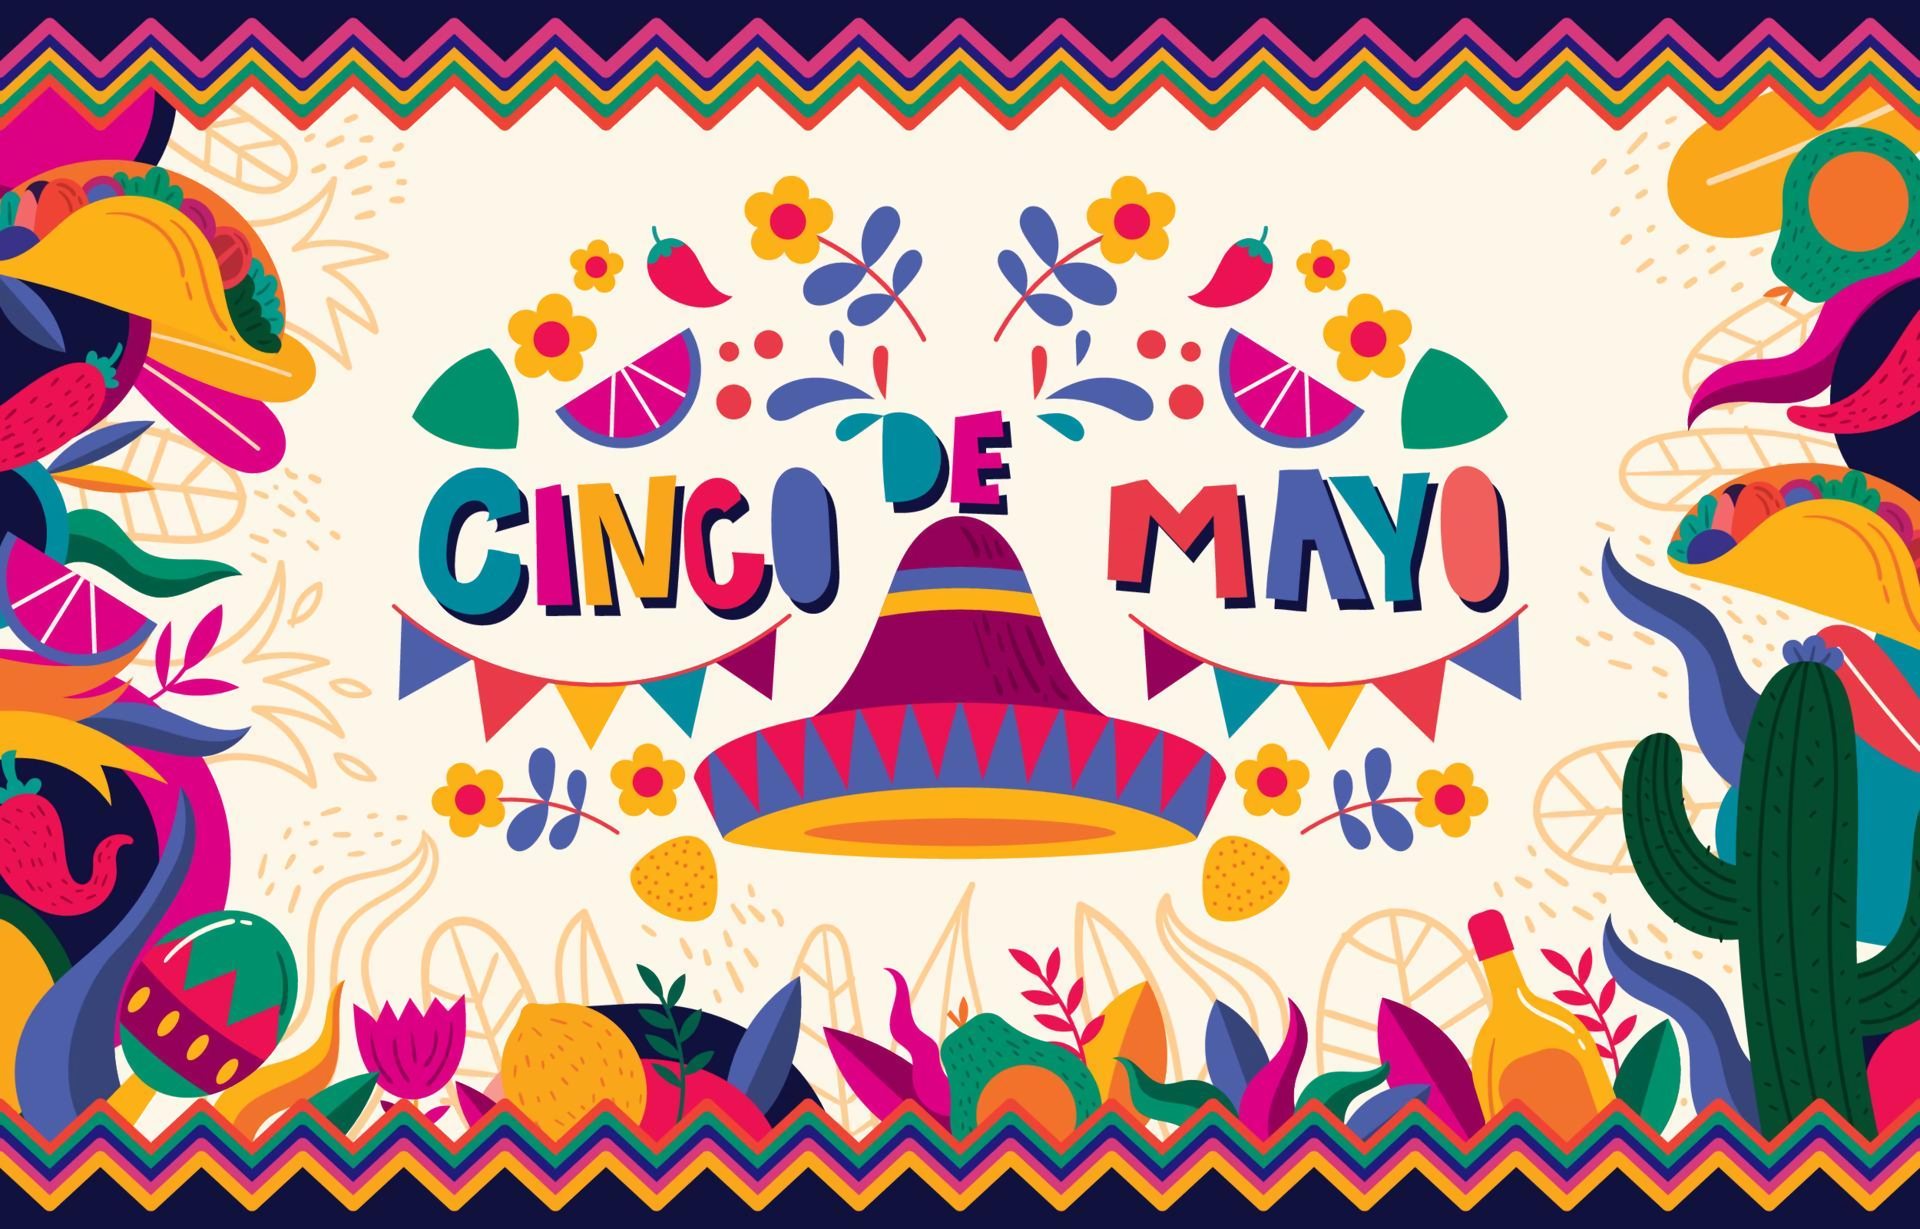 35 Cinco de Mayo Zoom Backgrounds  Free Download  The Bash